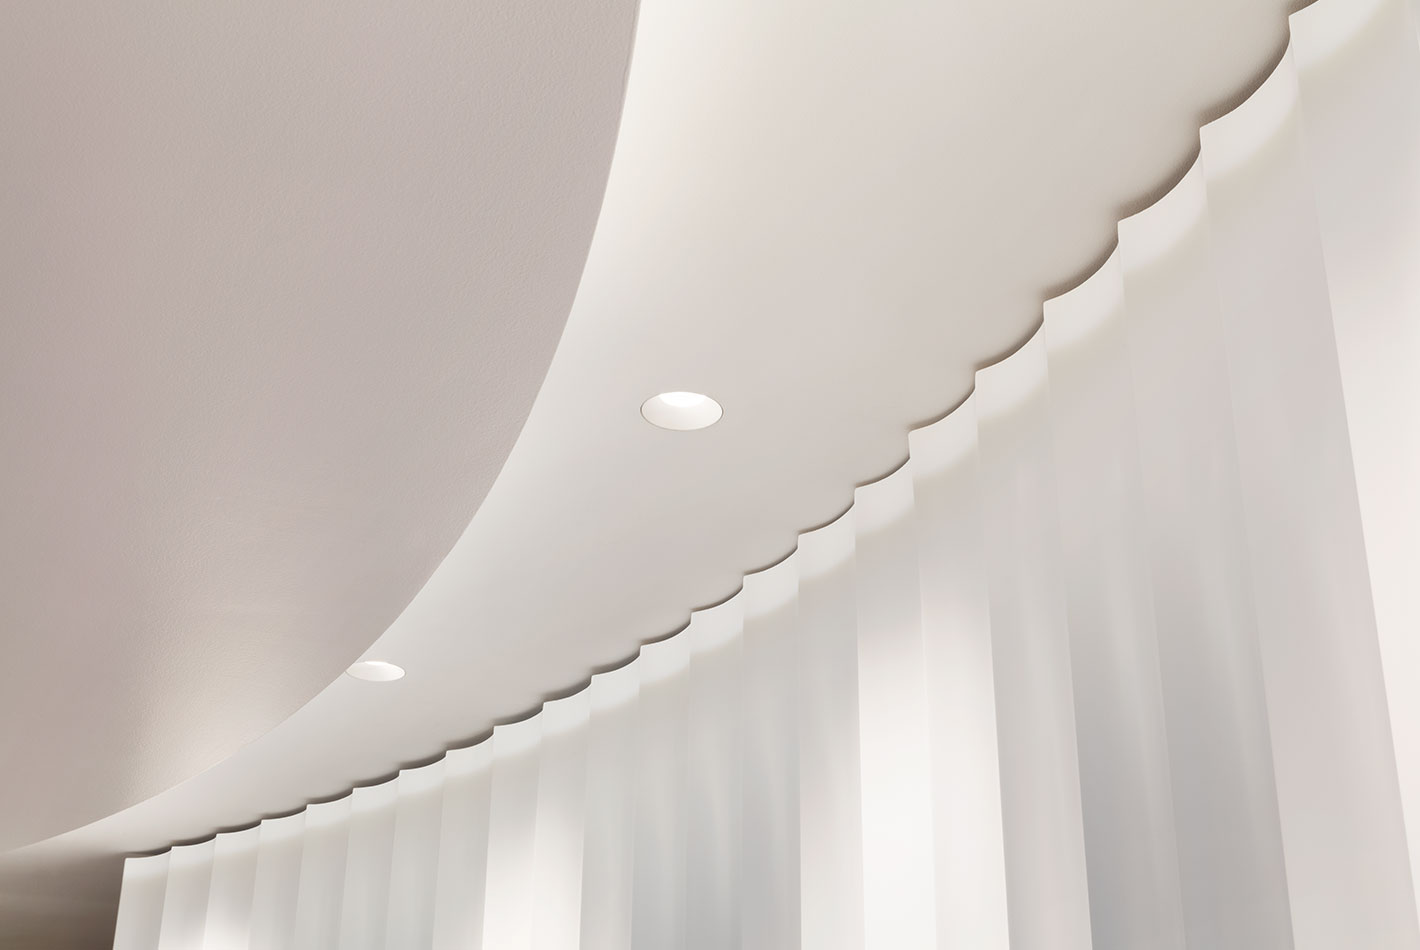 luted plaster curves around the oval shaped walls at1056 5th Ave